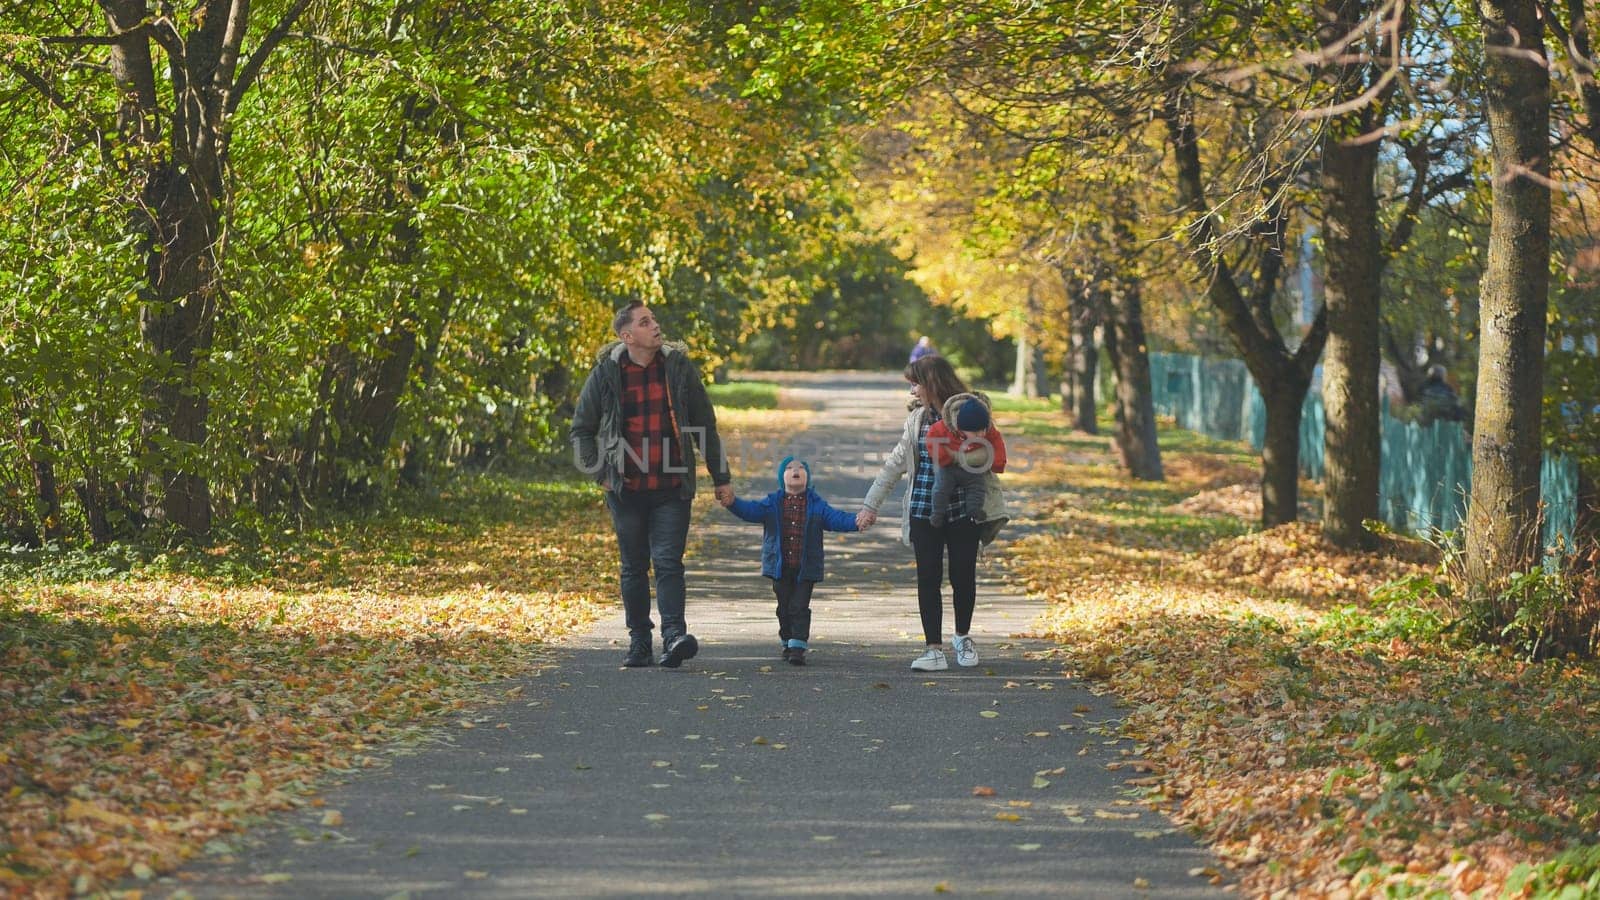 A happy young family walks along a city park road in the fall